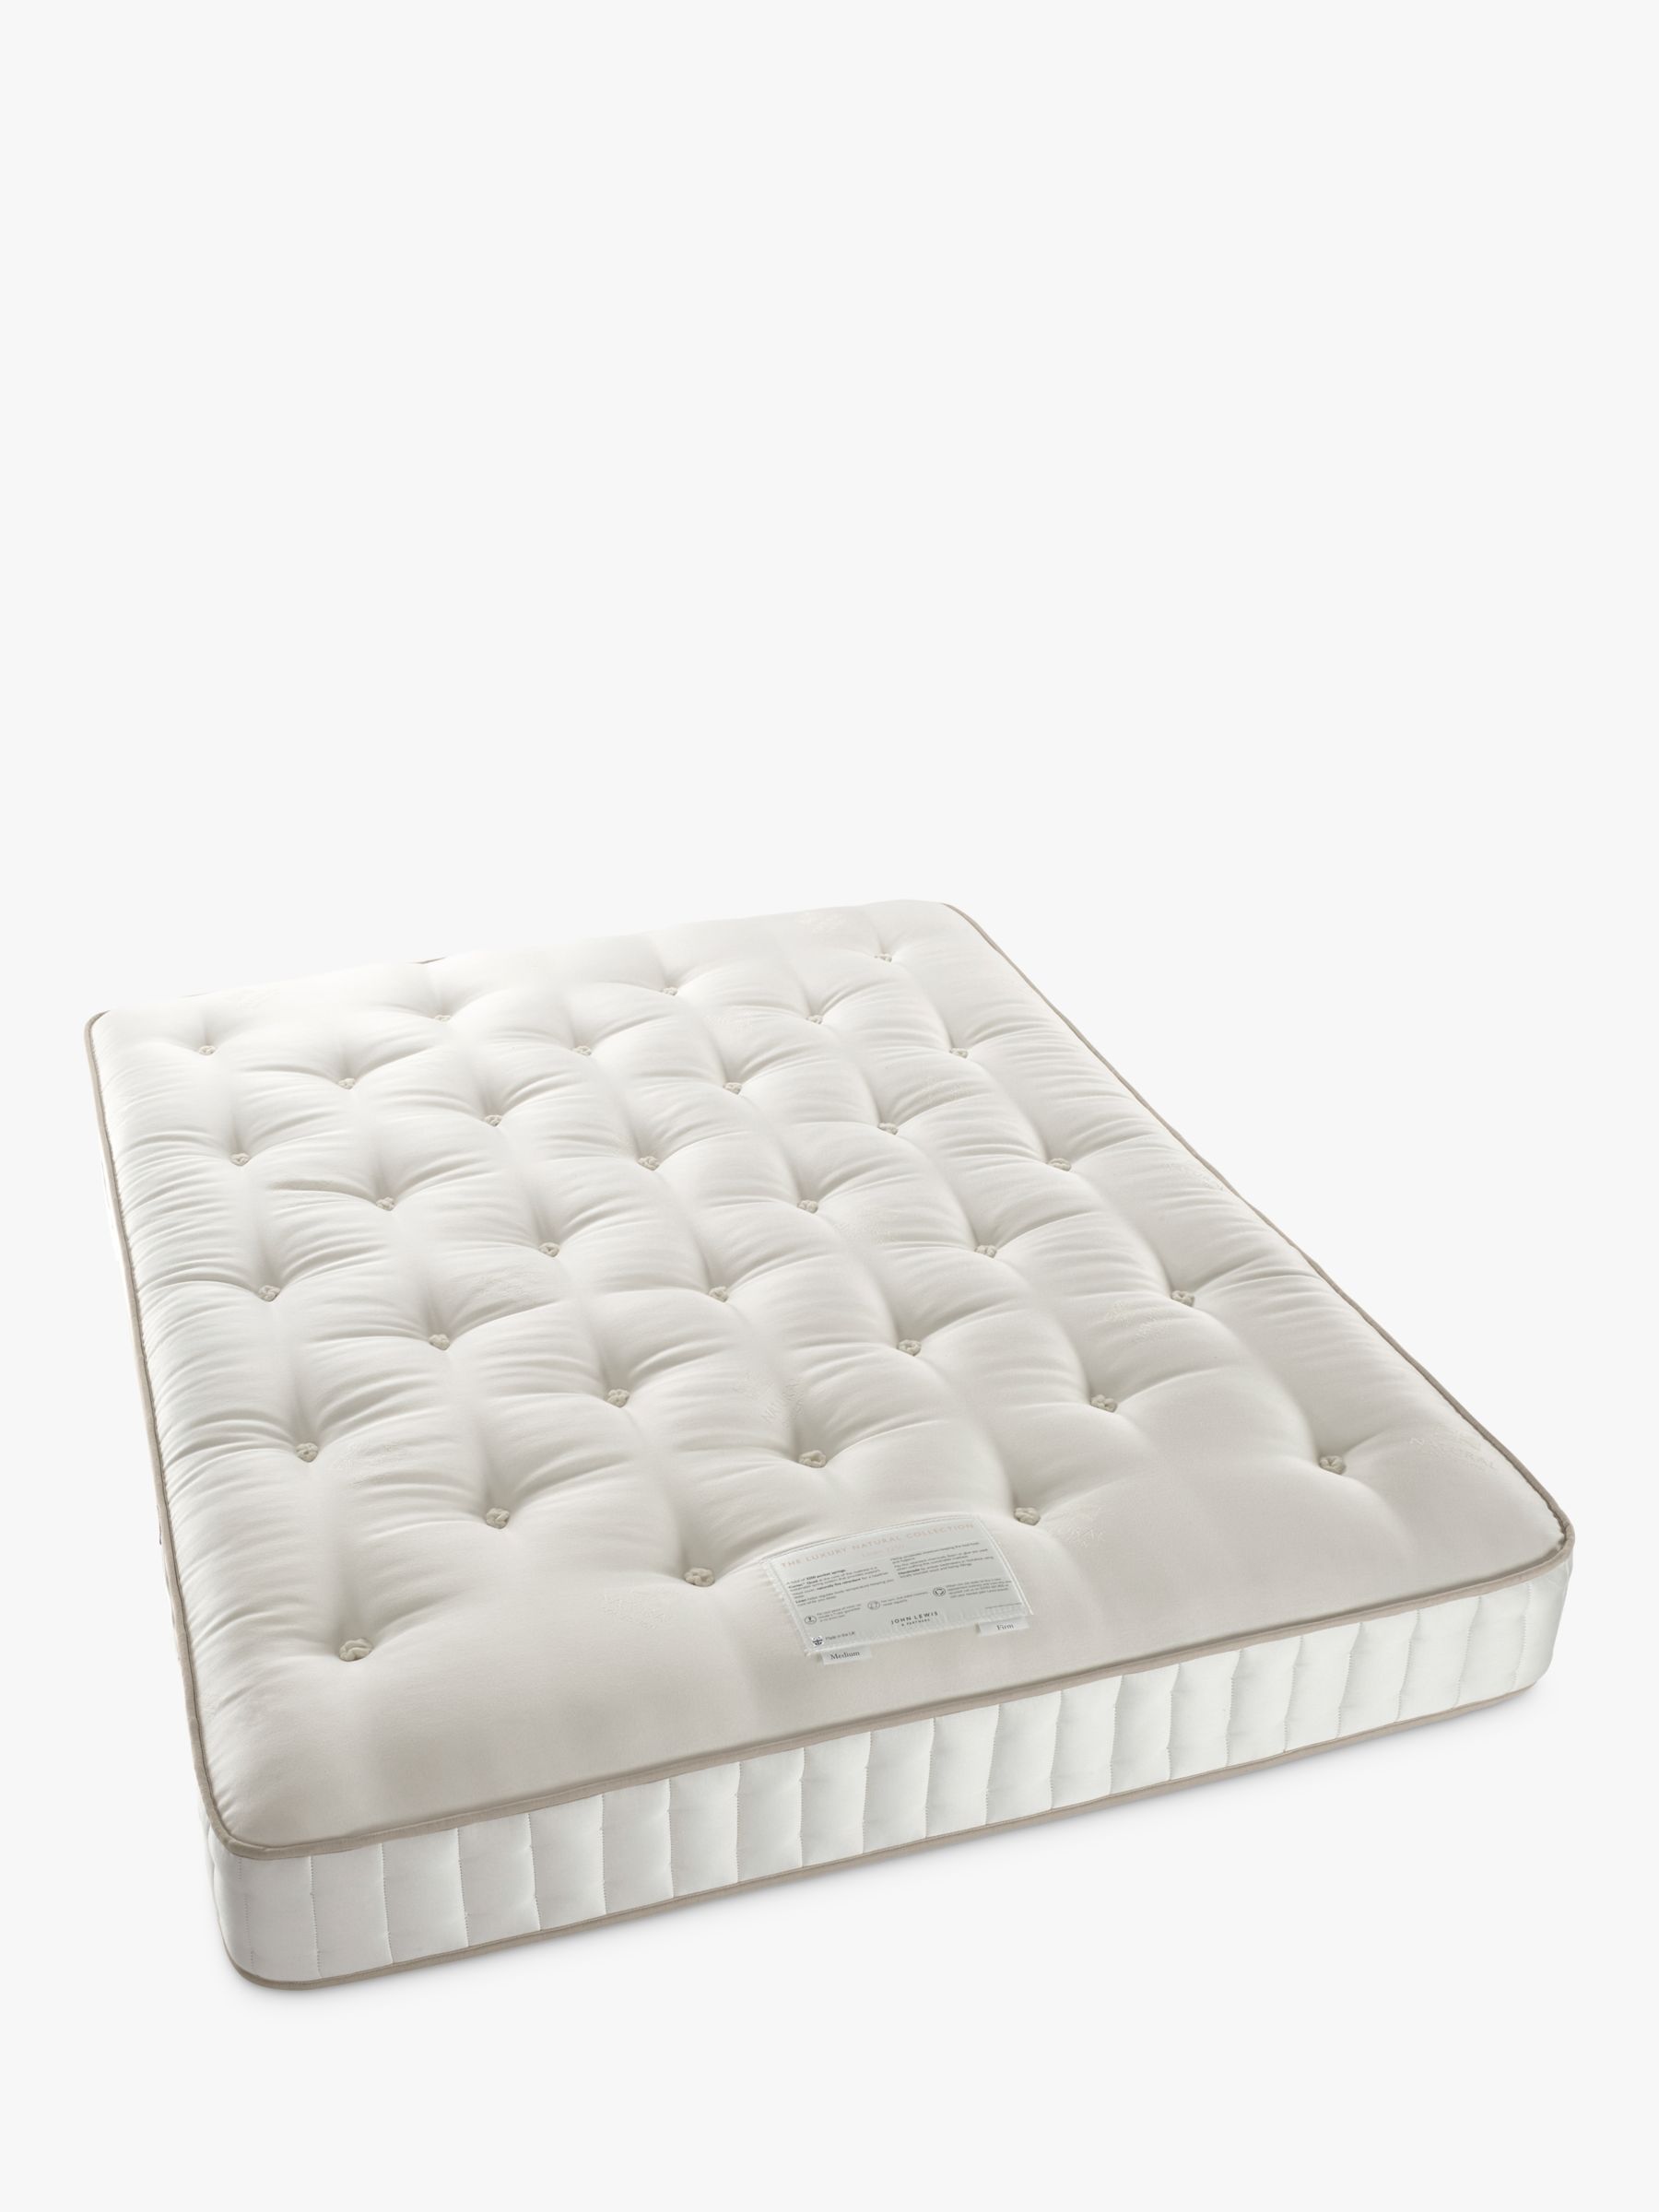 Photo of John lewis luxury natural collection linen 3250 small double firmer tension pocket spring mattress